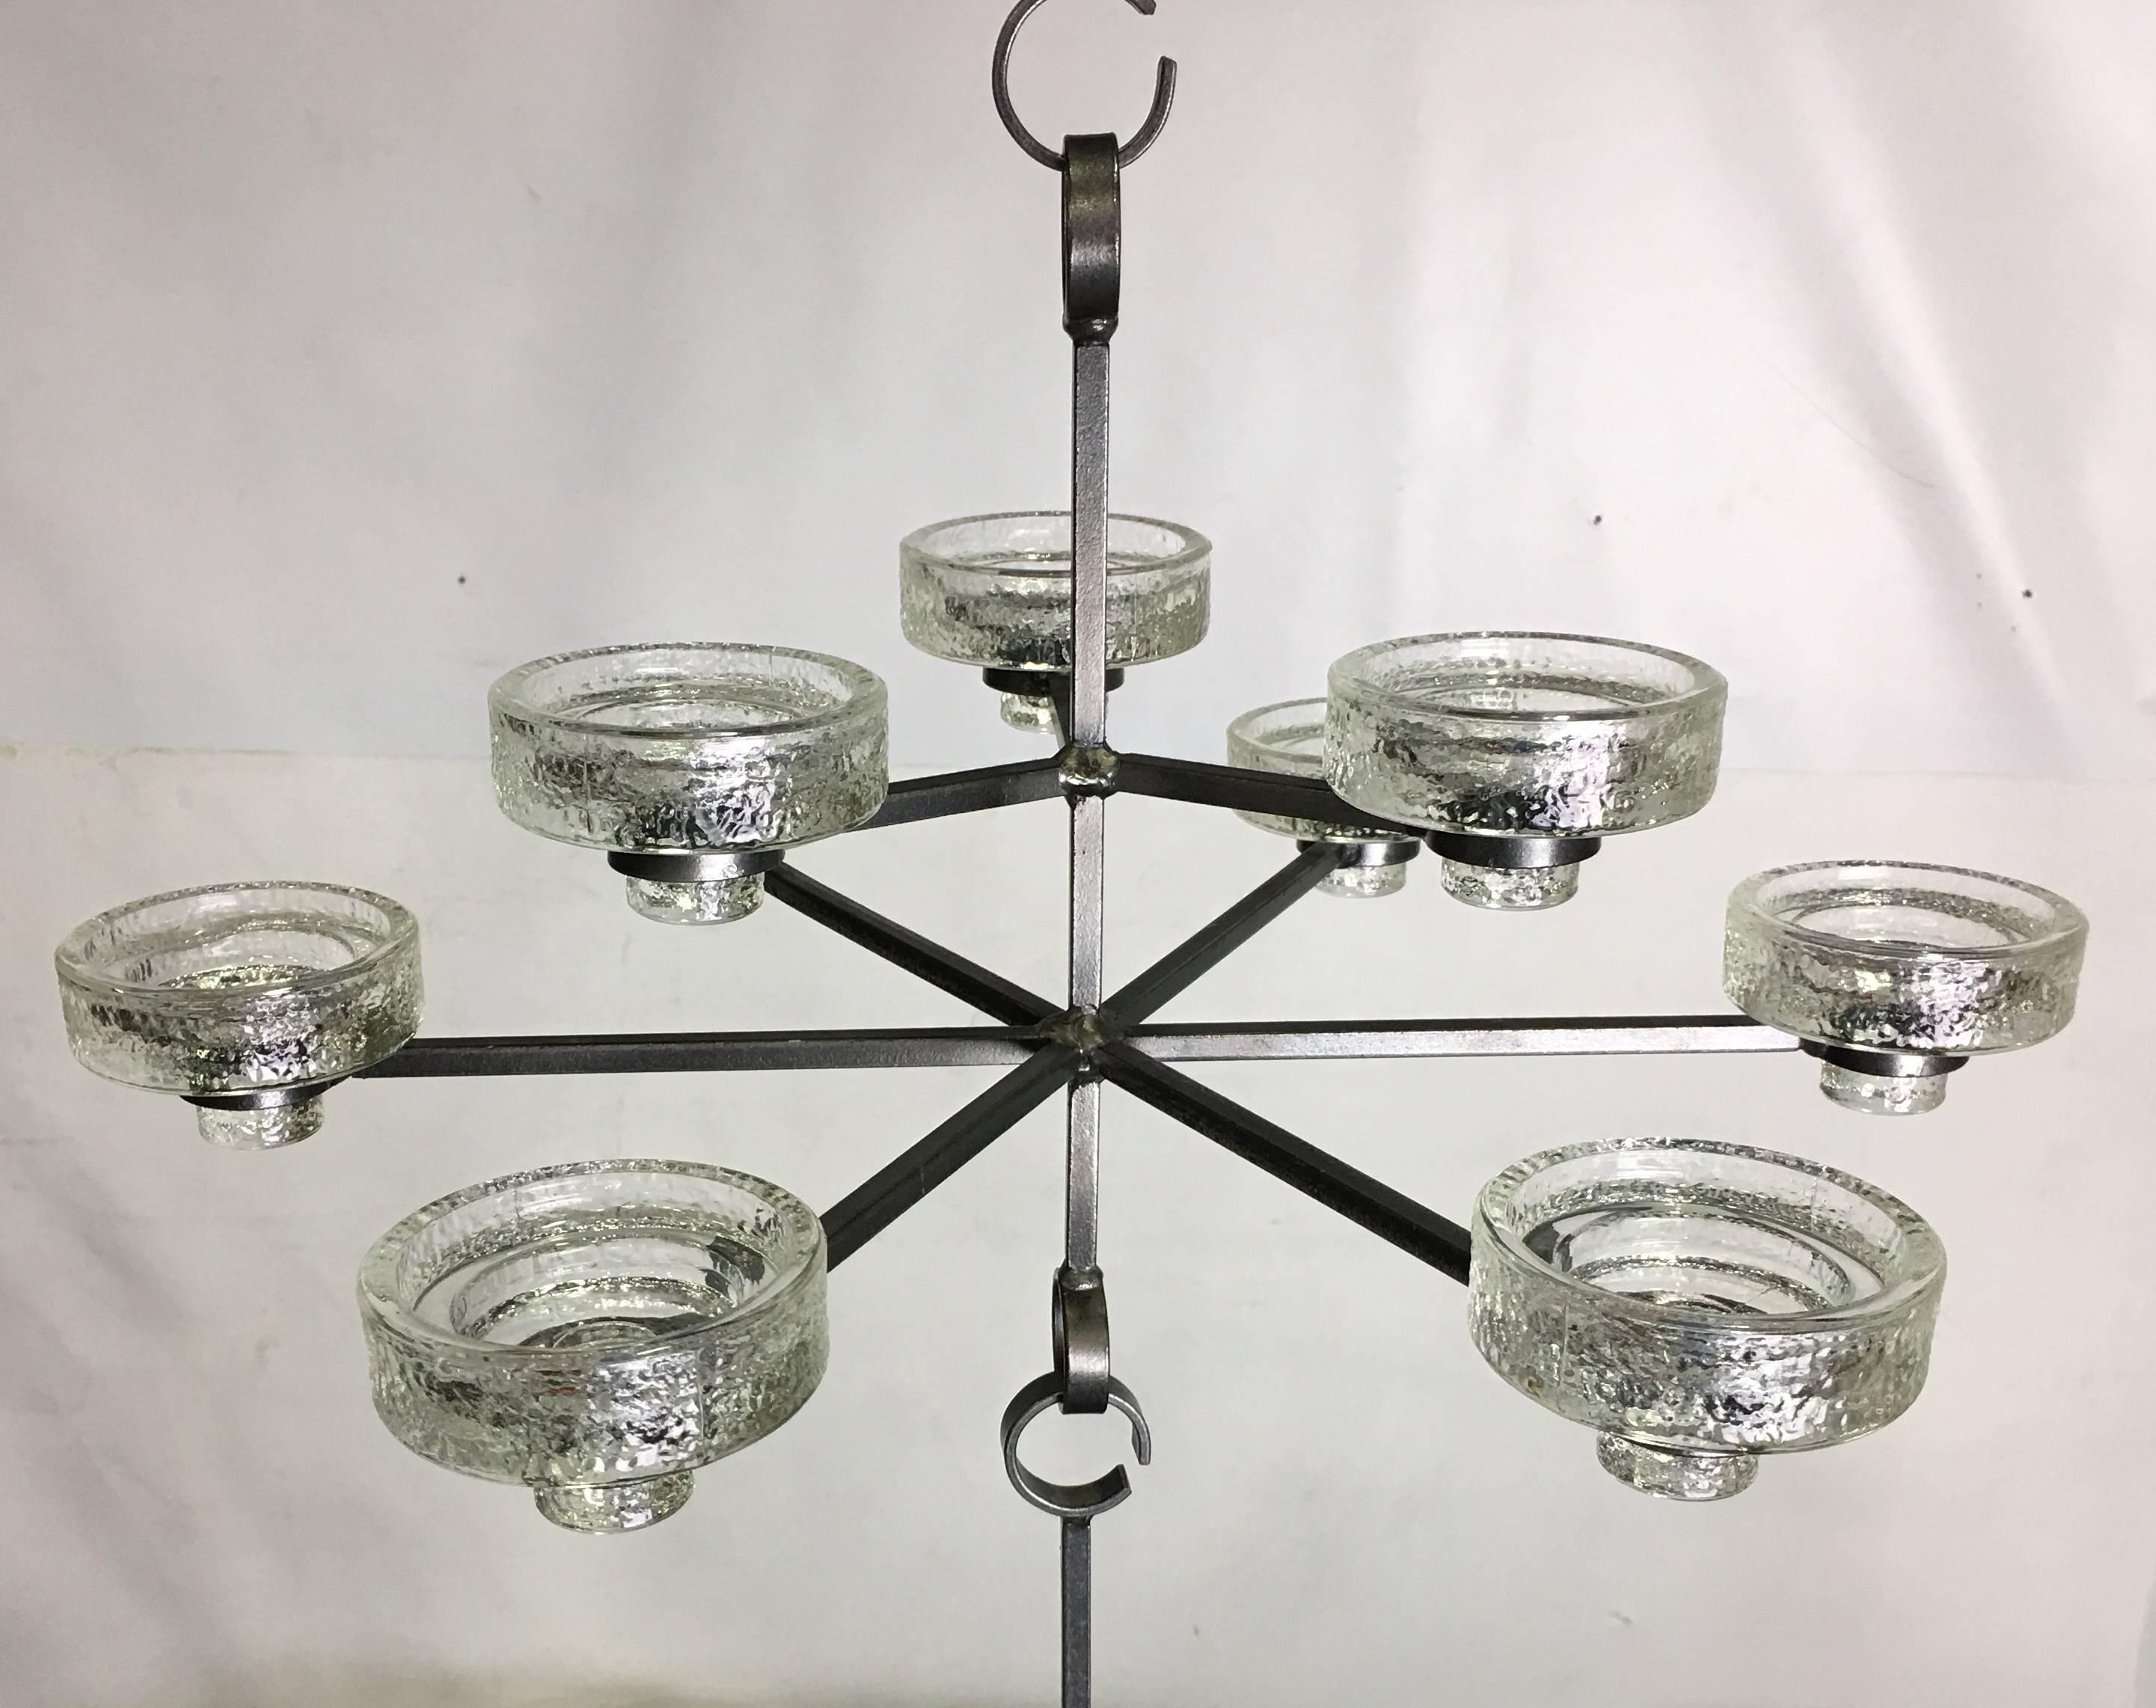 Rare and beautiful Nine-light chandelier by Erik Hoglund for Boda Nova. There are three 12" extensions.